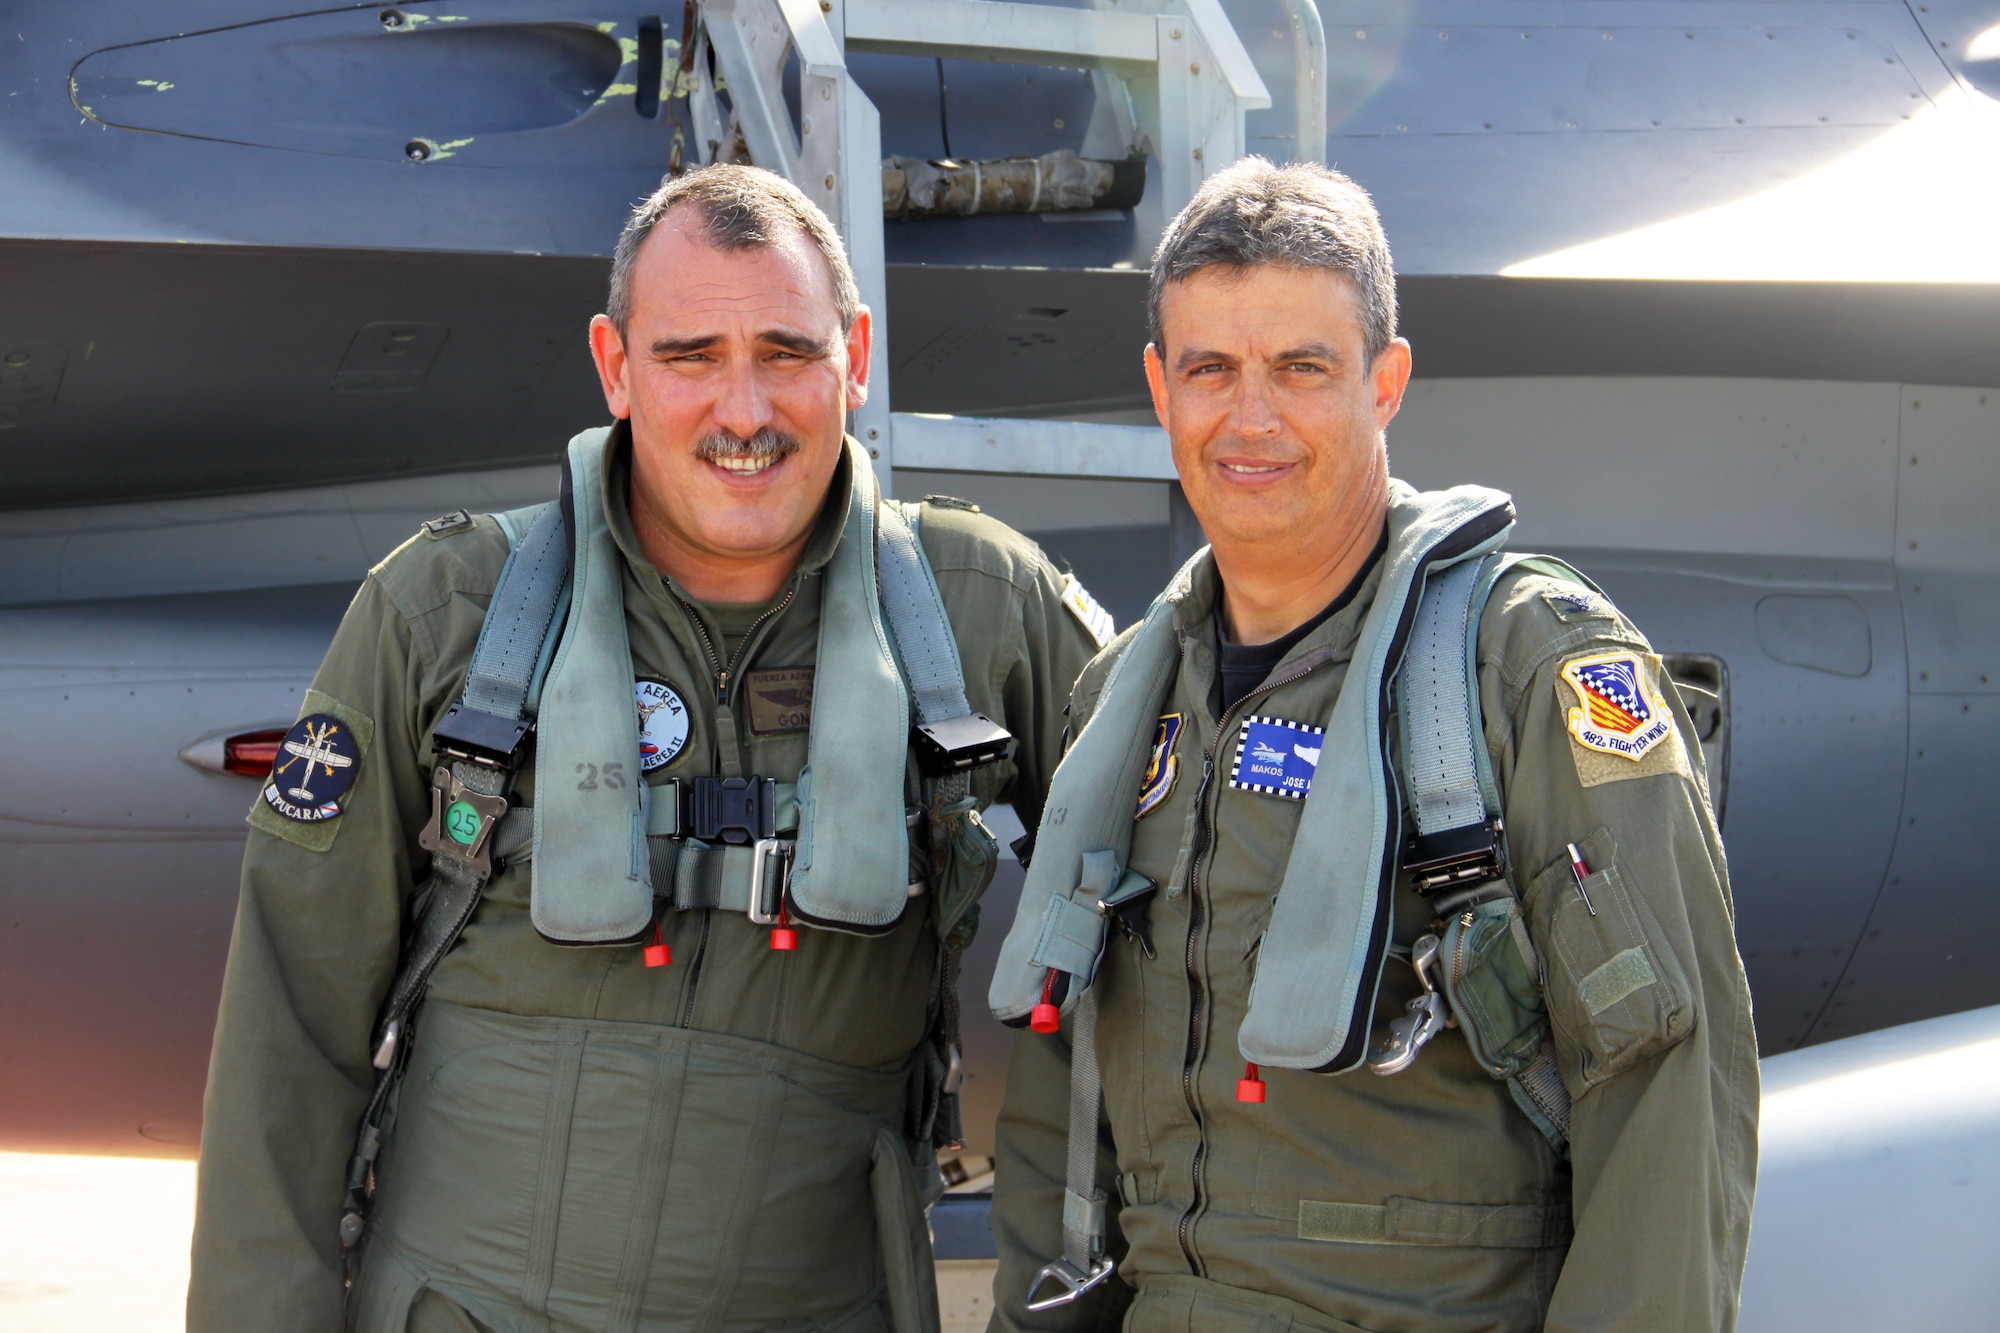 Uruguayan Air Force Col. Sergio Gonzalez, left, Commander, 2nd Air Brigade, and Col. Jose Monteagudo, Vice Commander, 482nd Fighter Wing, prepare to fly an F-16D of the 93rd Fighter Squadron July 28, 2010. Col. Gonzalez was one of five members of the Uruguayan Air Force who visited Homestead for three days as part of an ongoing exchange program aimed at fostering closer ties between the two nations. (U.S. Air Force photo/Ian Carrier)